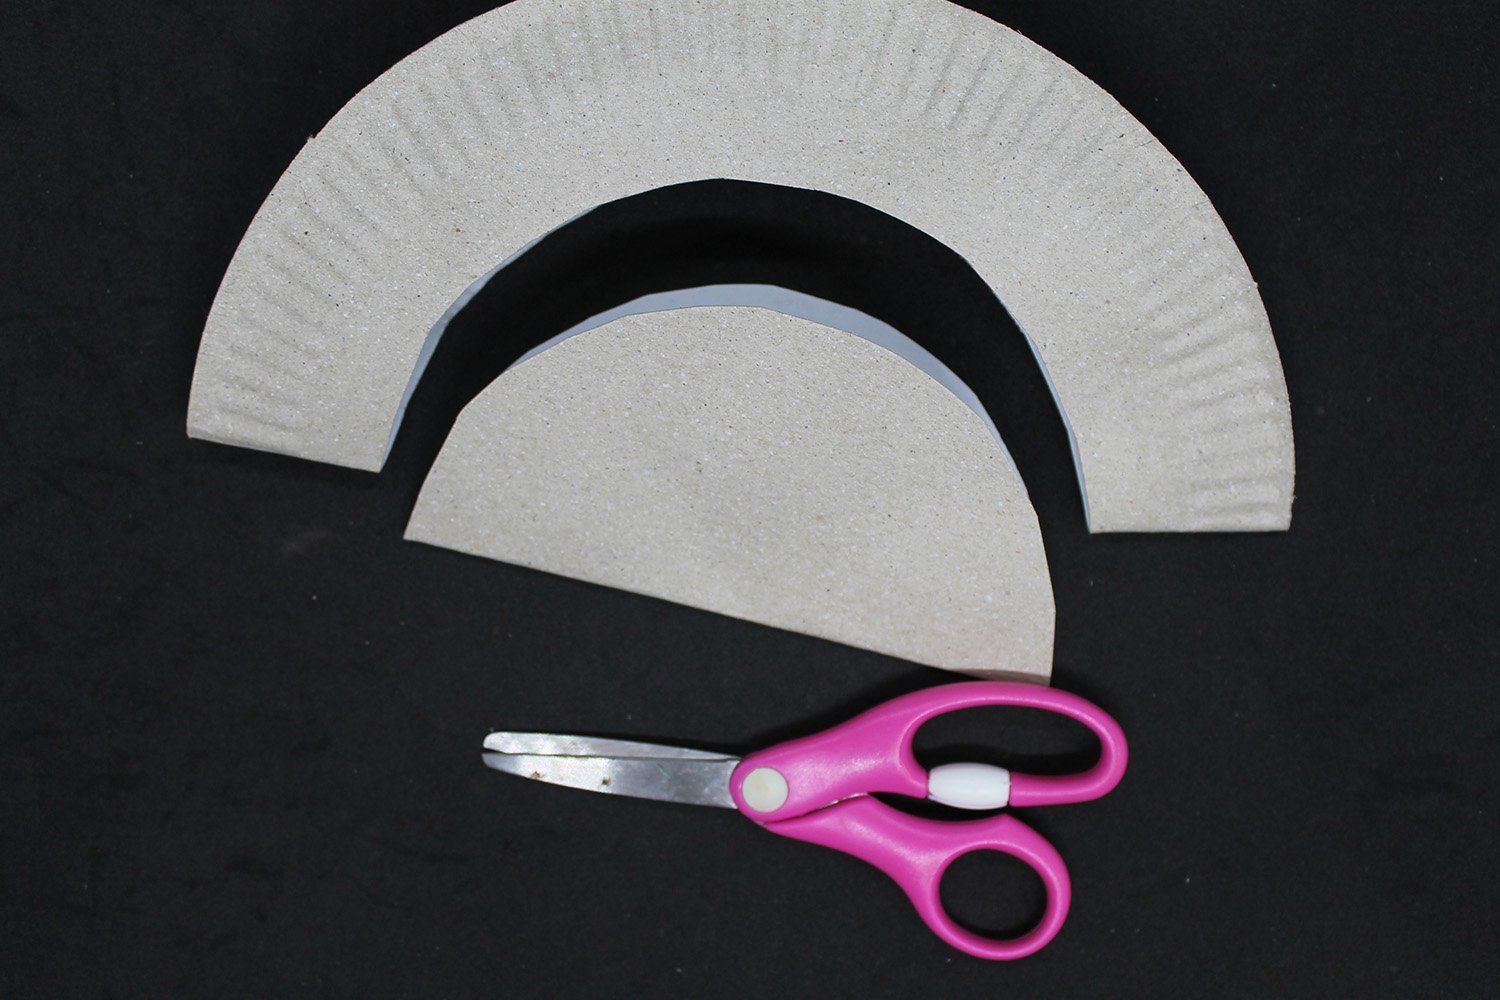 How to Make a Paper Plate Snake - Step 3